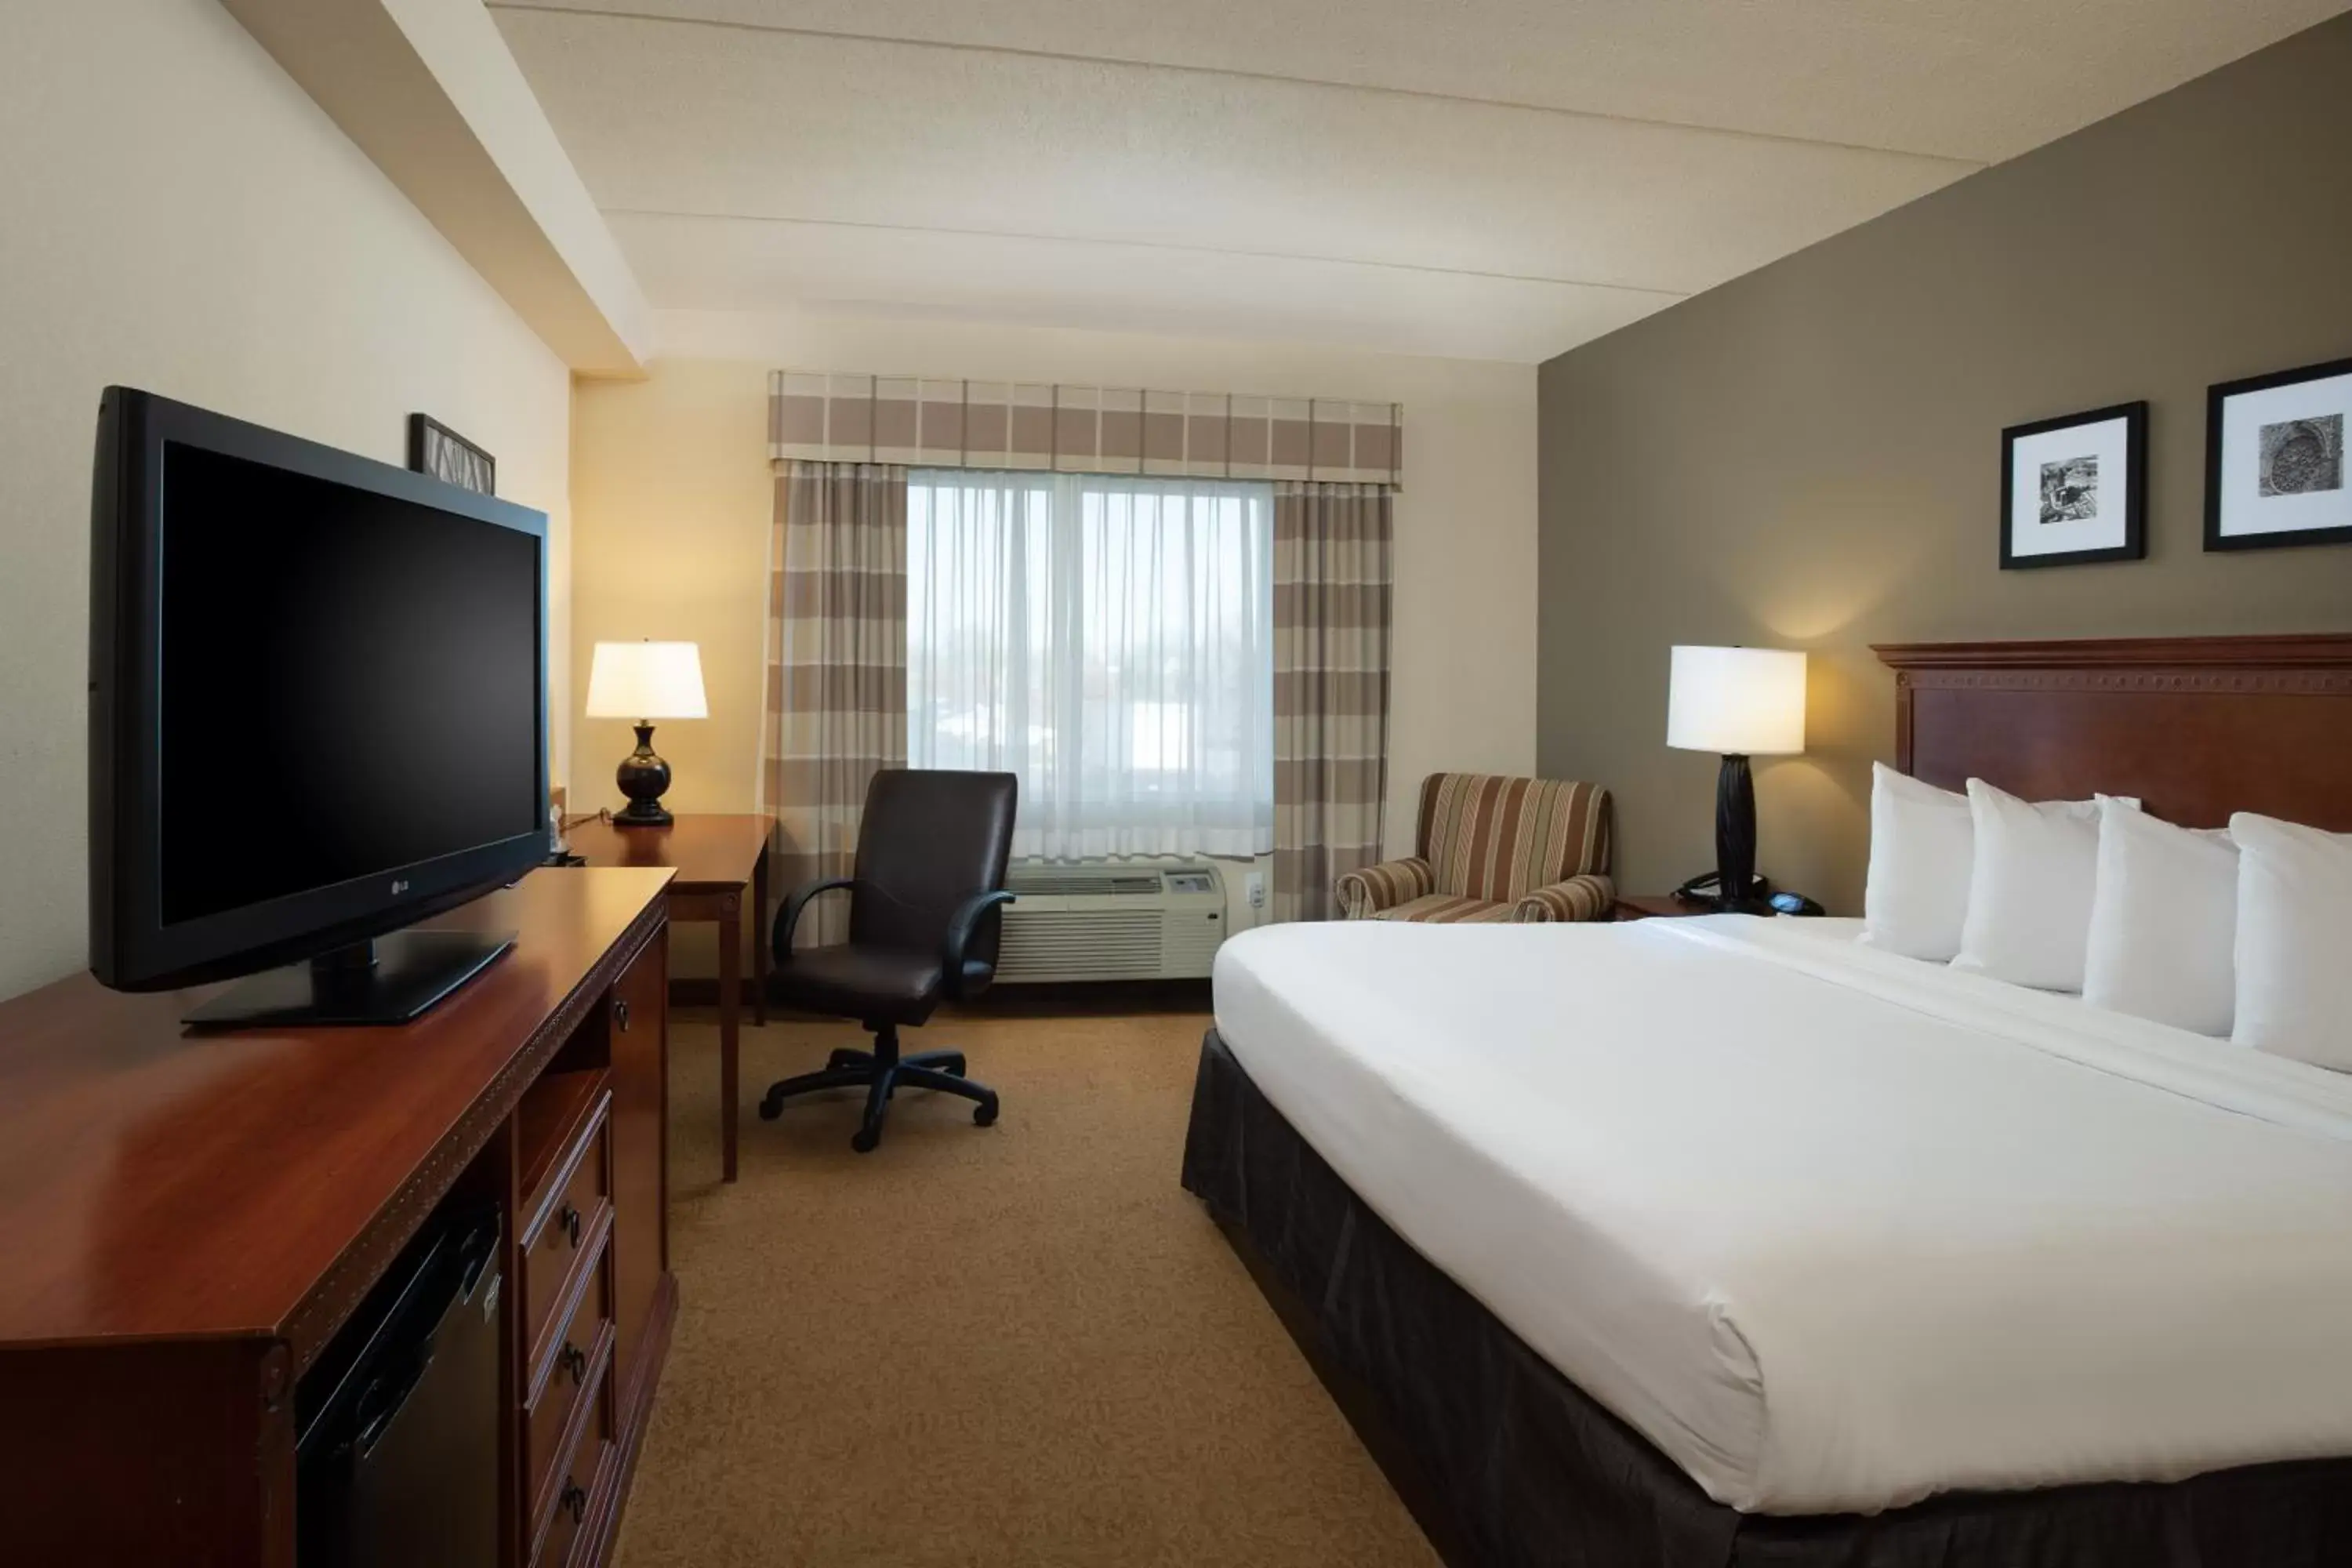 Bedroom, TV/Entertainment Center in Country Inn & Suites Buffalo South I-90, NY